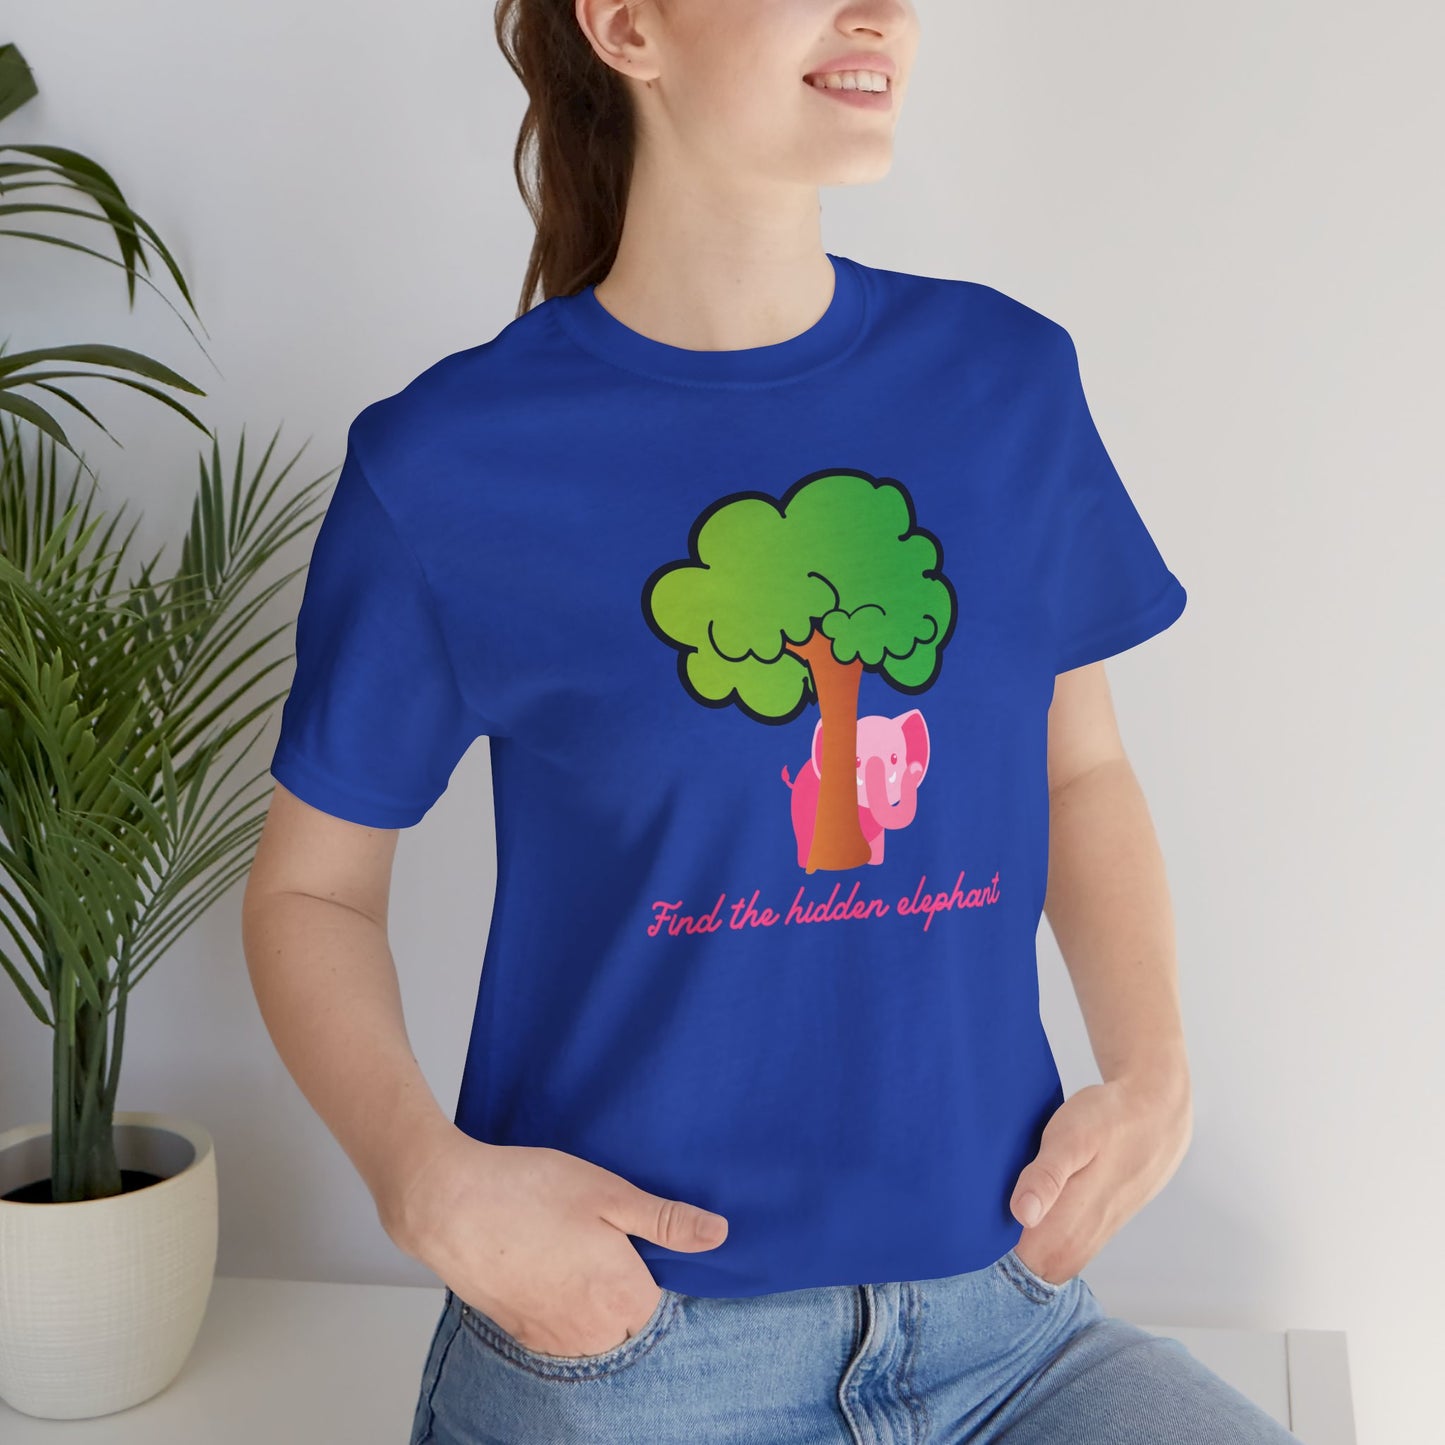 Find The Hidden Elephant - Soft Cotton Adult Unisex T-Shirt, Gift for friends and family, Gift for friends and family by clothezy.com - Buy Now